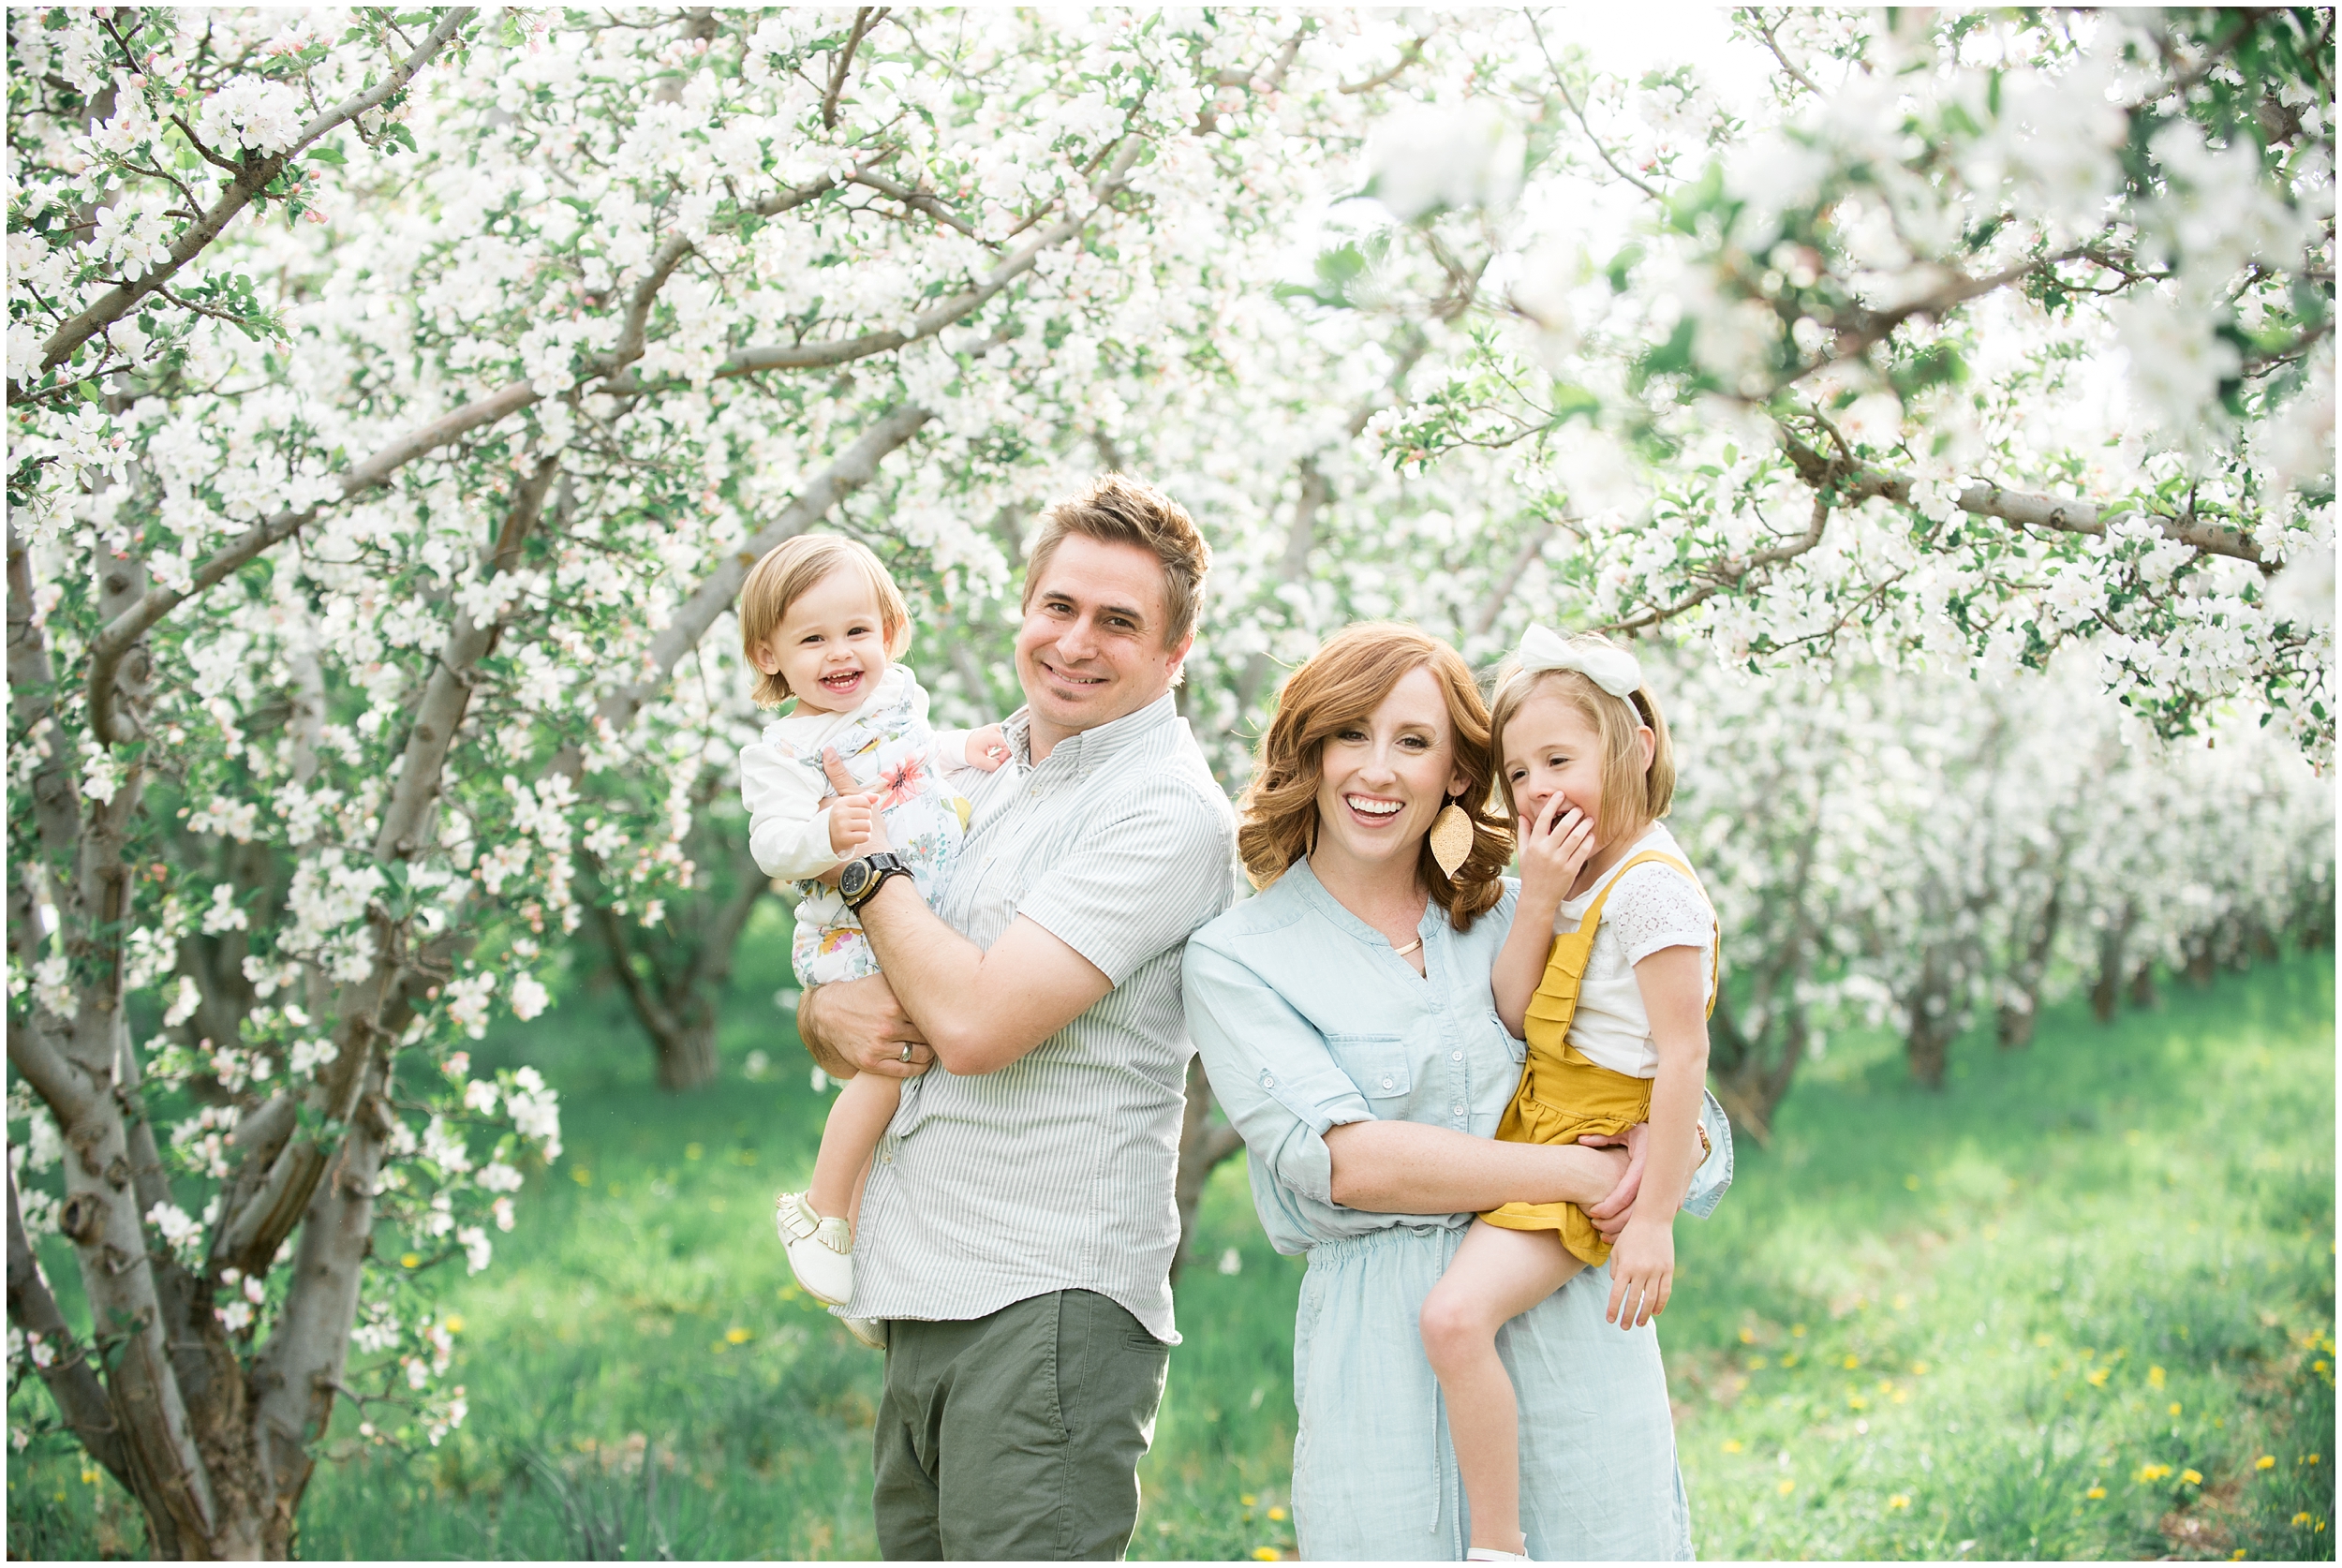 Family photographer, spring blossoms, play blue and yellow, orchard photos, Utah wedding photographers, Utah wedding photographer, Utah wedding photography, Utah county wedding photography, Utah county wedding photographer, salt lake city photographers, salt lake city wedding photography, salt lake photographers, salt lake city photographers, photographers in Utah, Utah photography, photography Utah, photographer Utah, Kristina Curtis photography, Kristina Curtis Photographer, www.kristinacurtisphotography.com